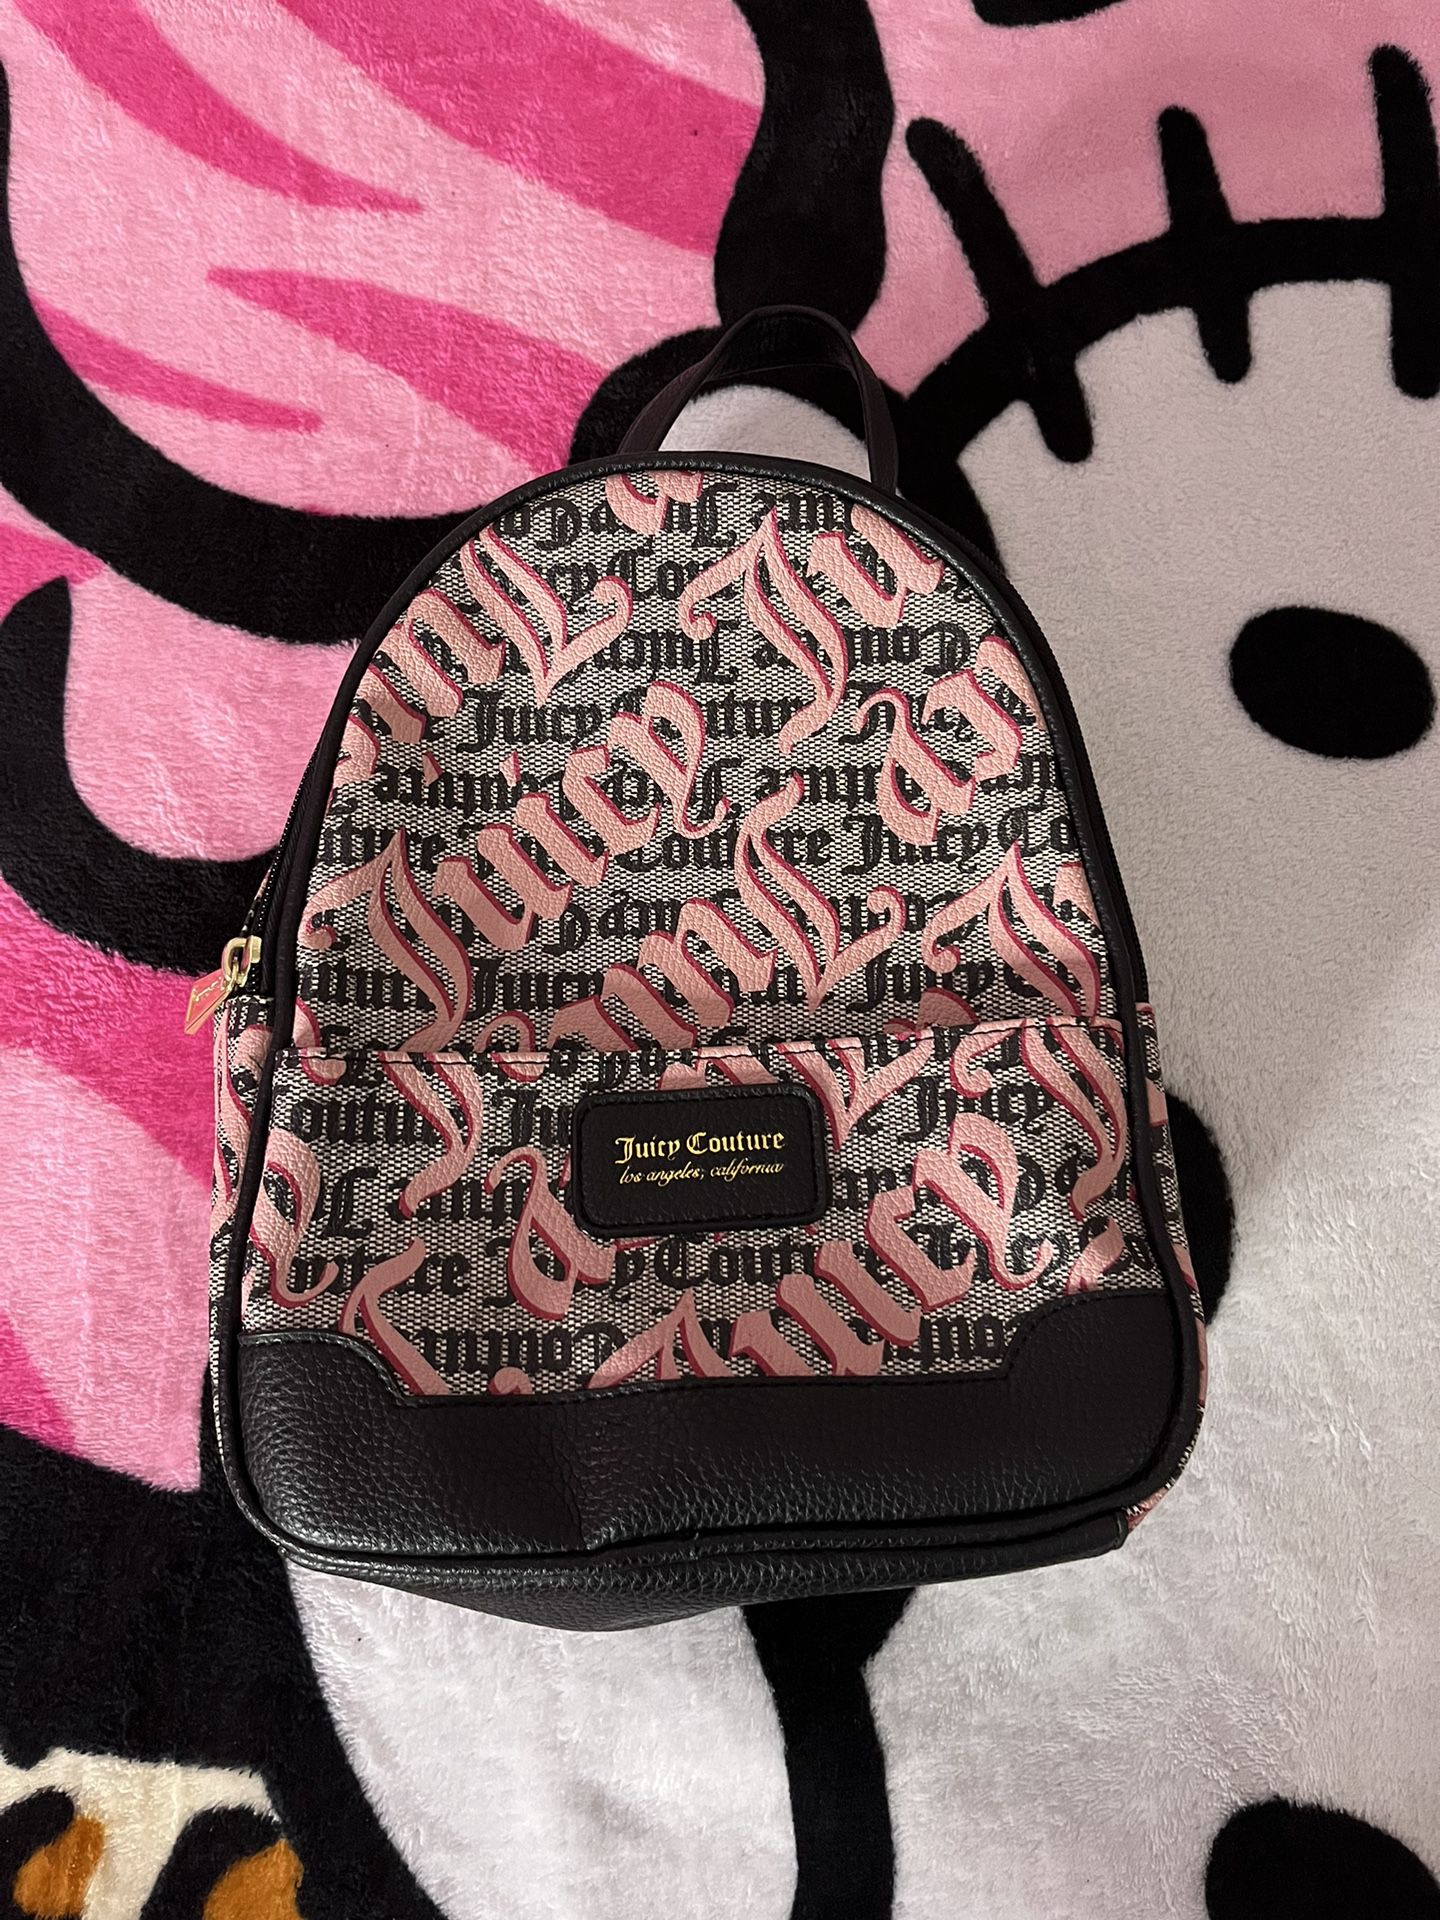 Juicy Couture Backpack $20